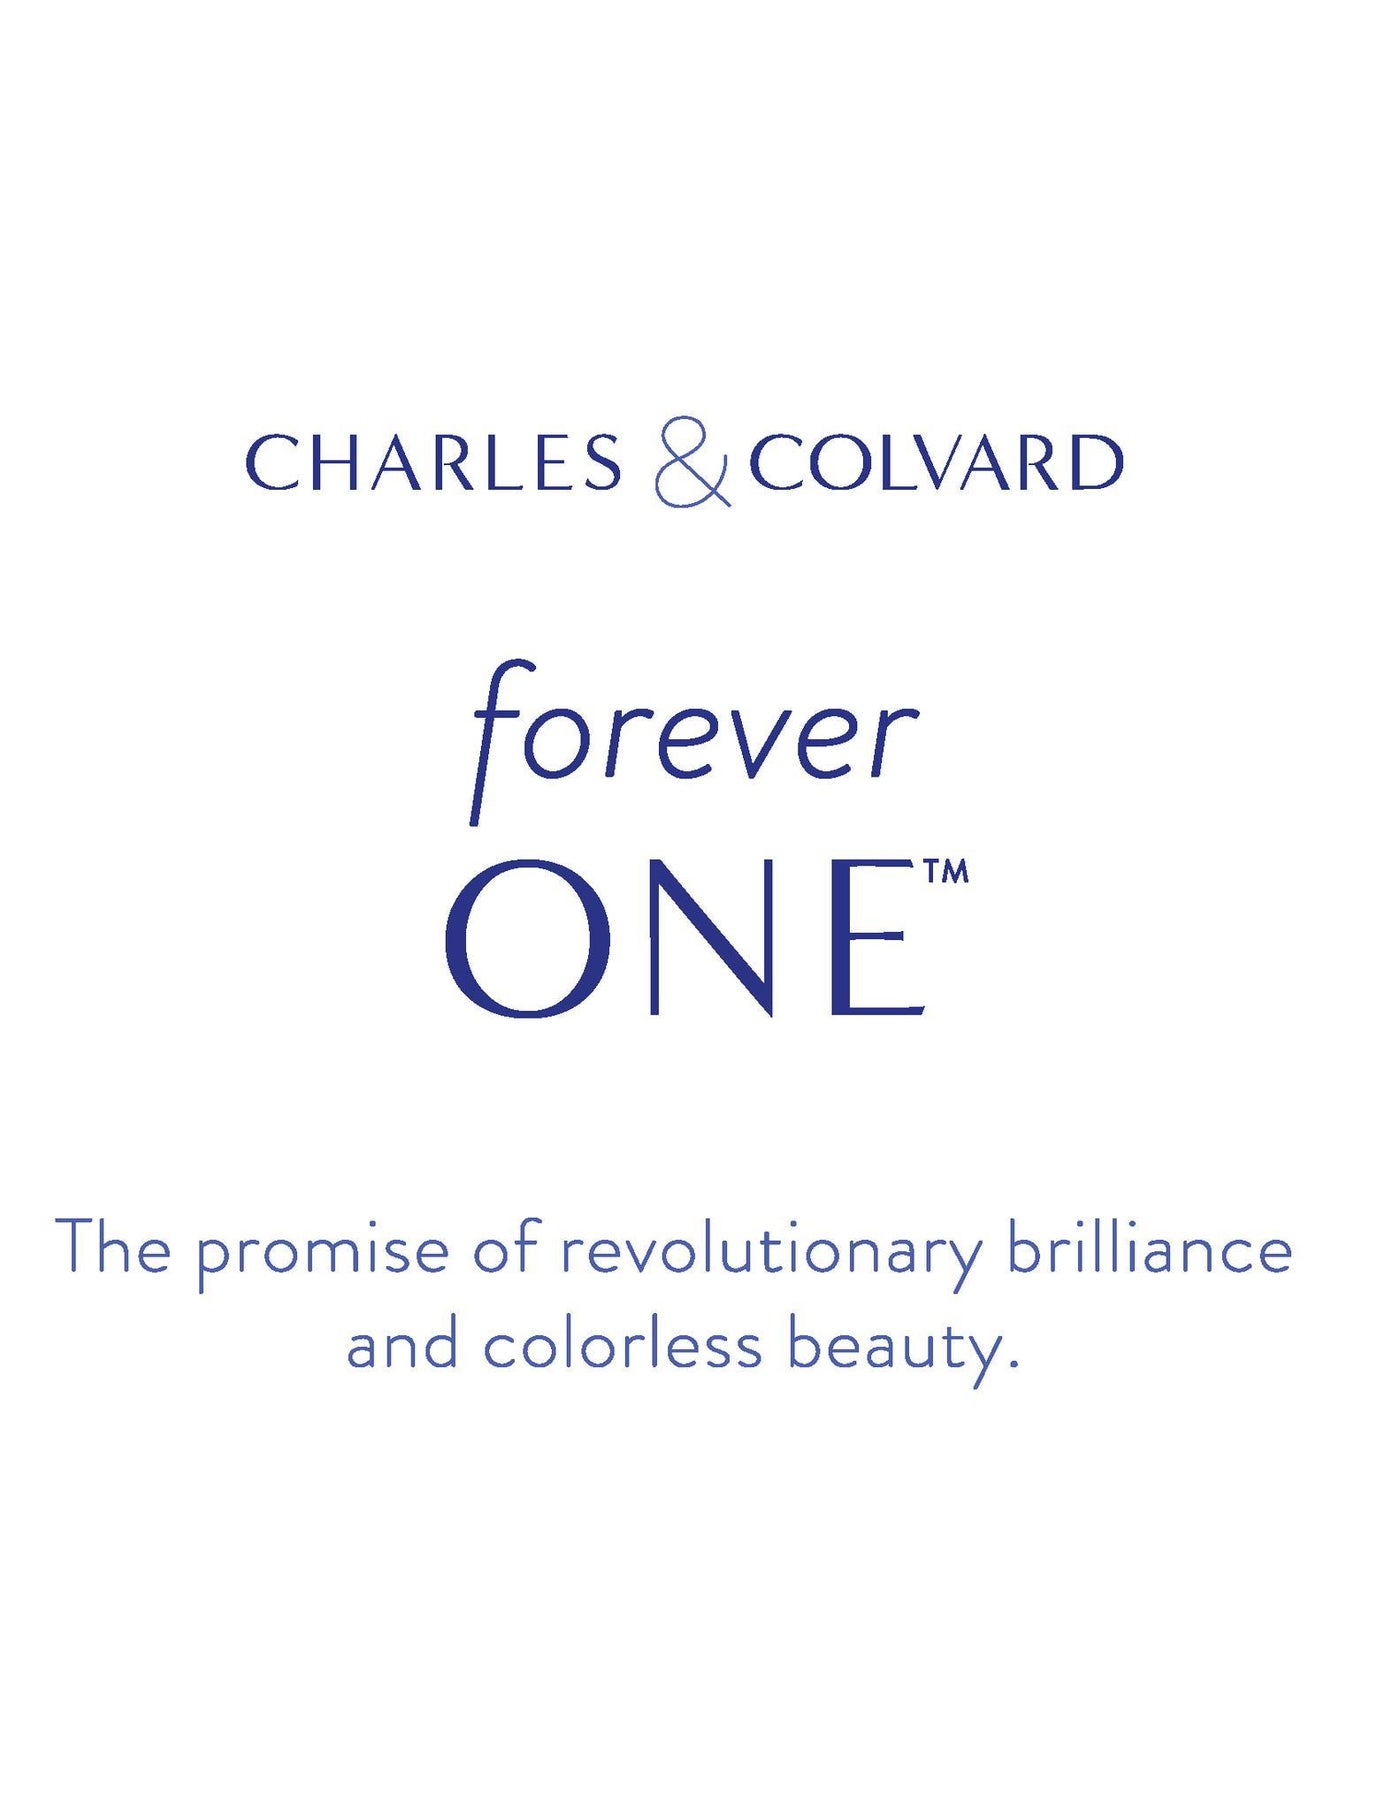 Certified Radiant Forever One Charles & Colvard Loose Moissanite Stone - 3.90 Carats - E Color - VVS1 Clarity-Certified Forever ONE Moissanite-Fire & Brilliance ®